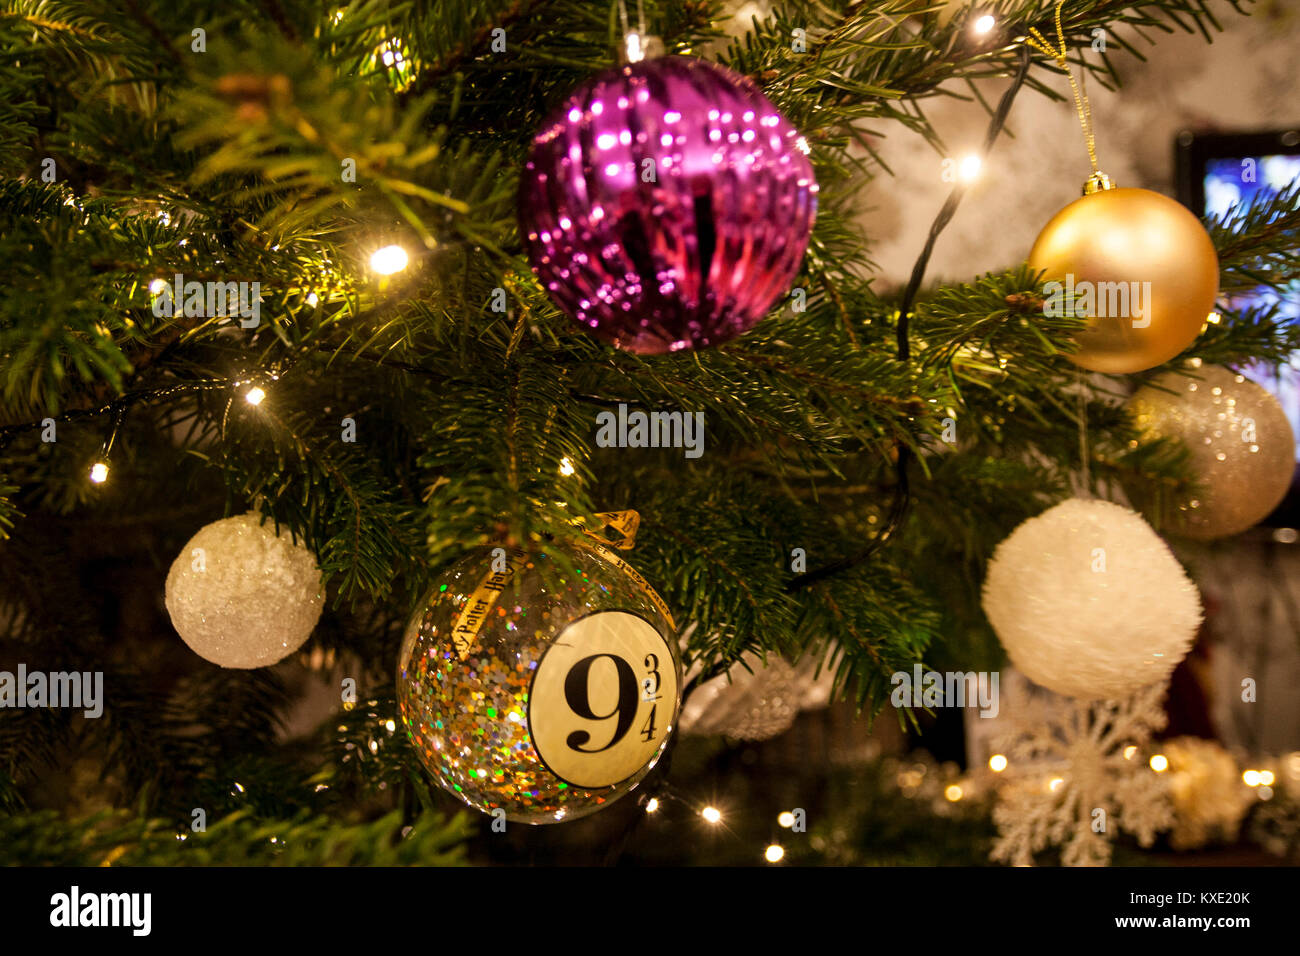 Closeup of purple gold, white and silver Christmas tree bauble decorations, baubles, harry potter decoration, hanging on a real tree with lights on. Stock Photo